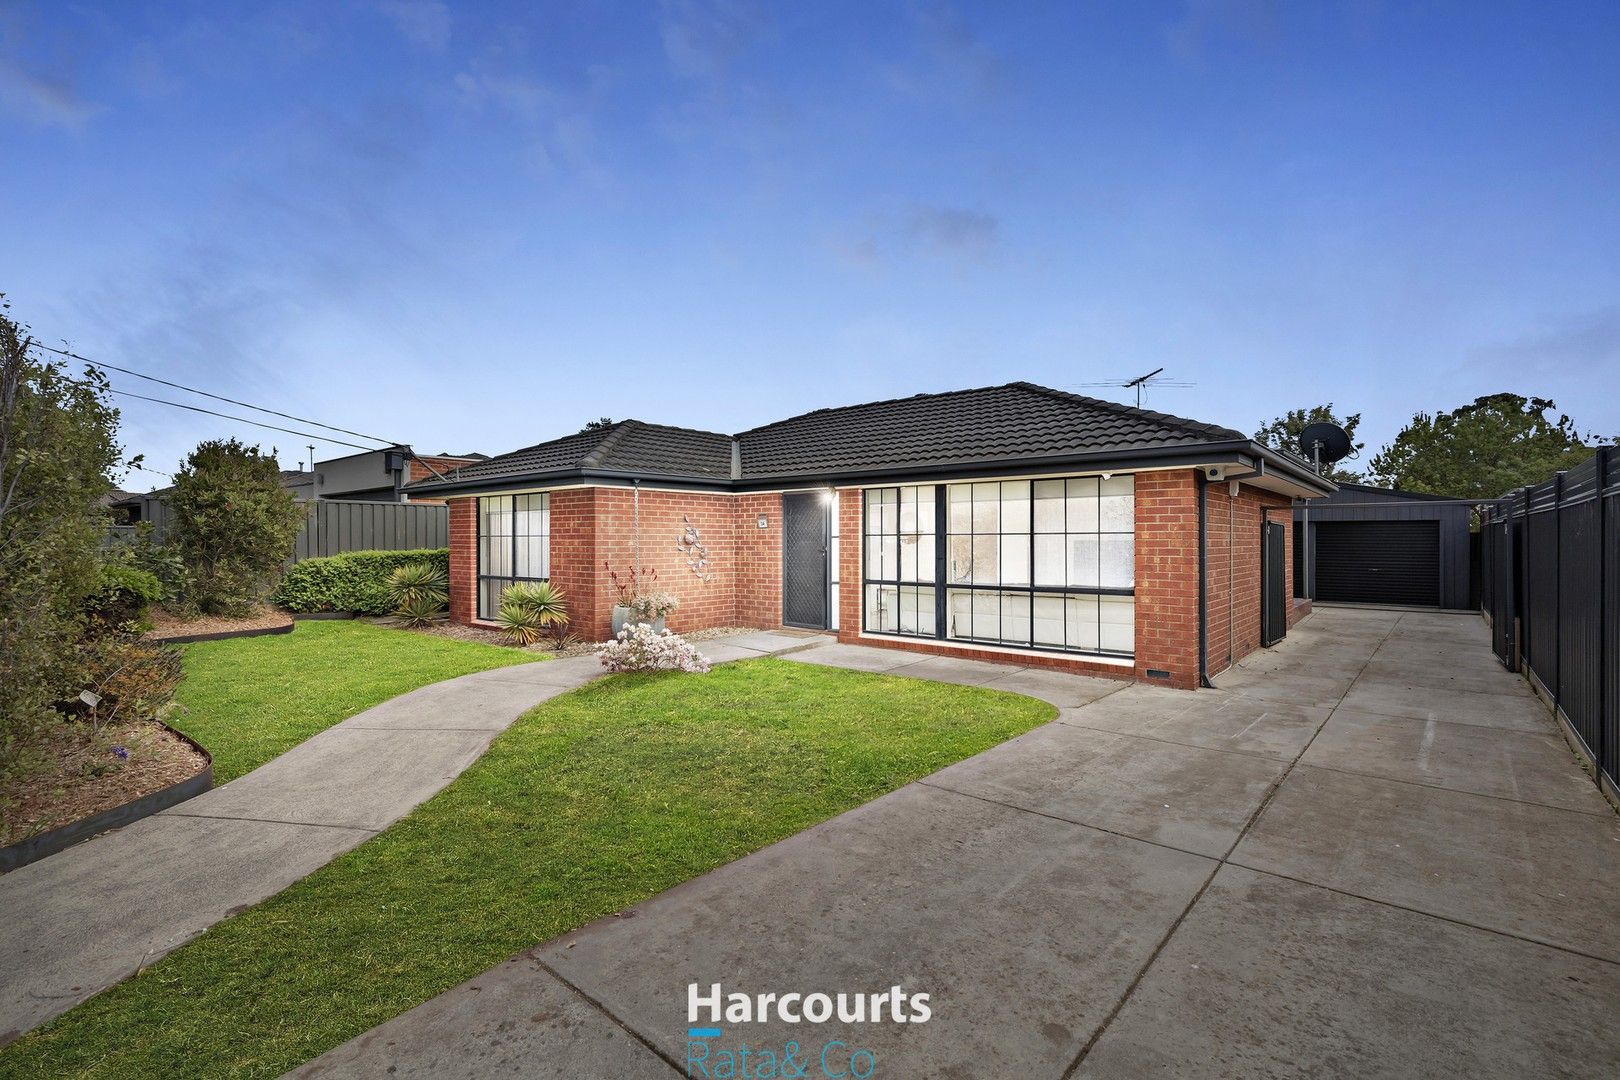 3 bedrooms House in 34 Halter Crescent EPPING VIC, 3076